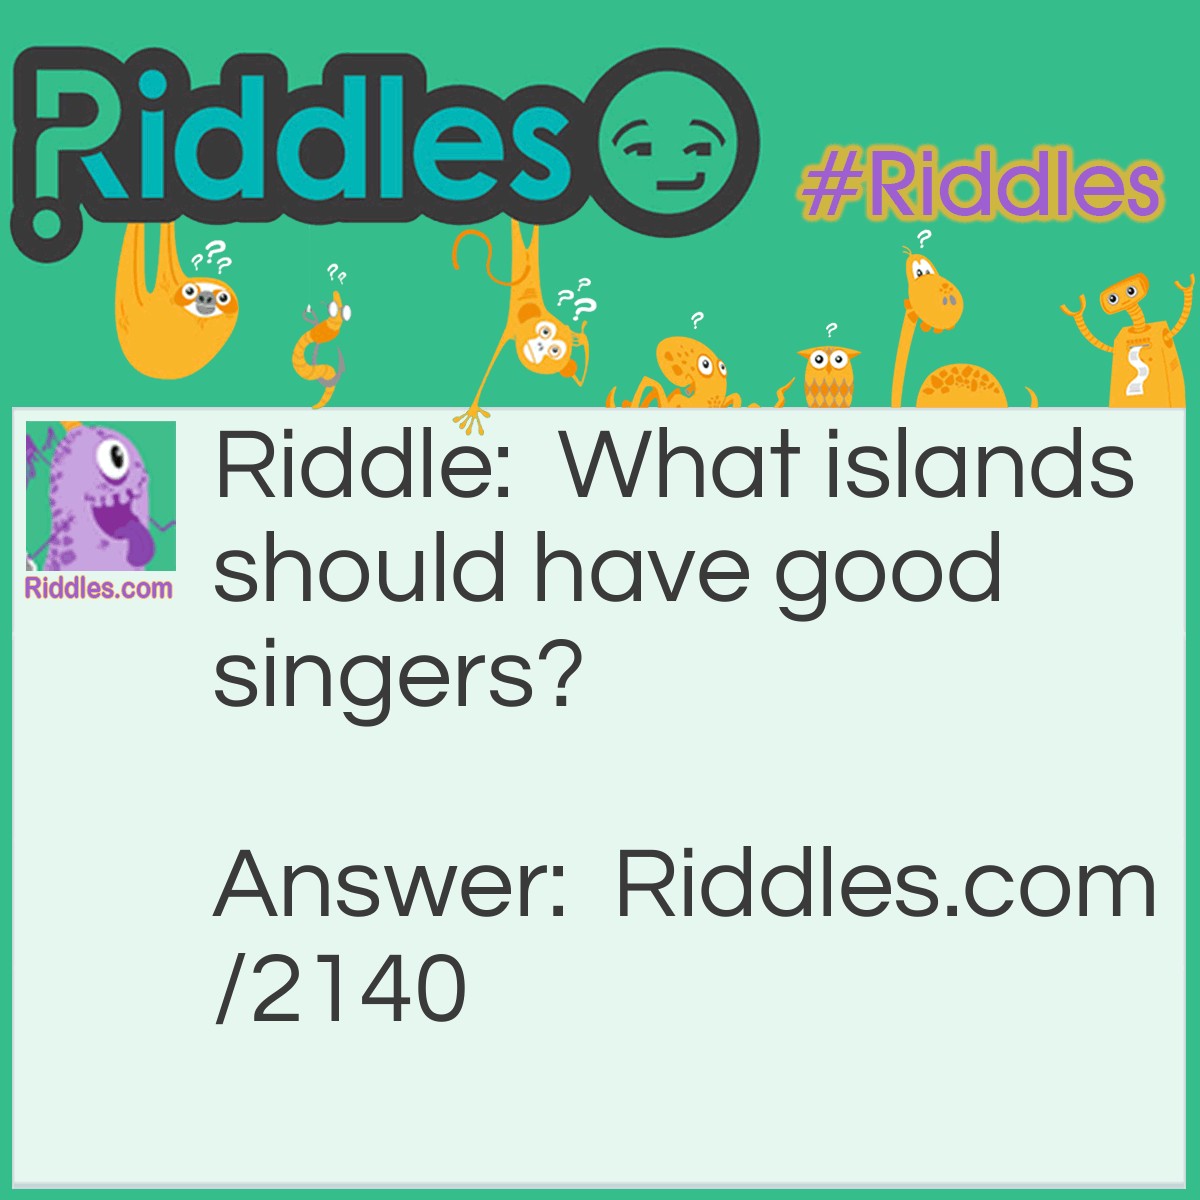 Riddle: What islands should have good singers? Answer: The Canary islands.